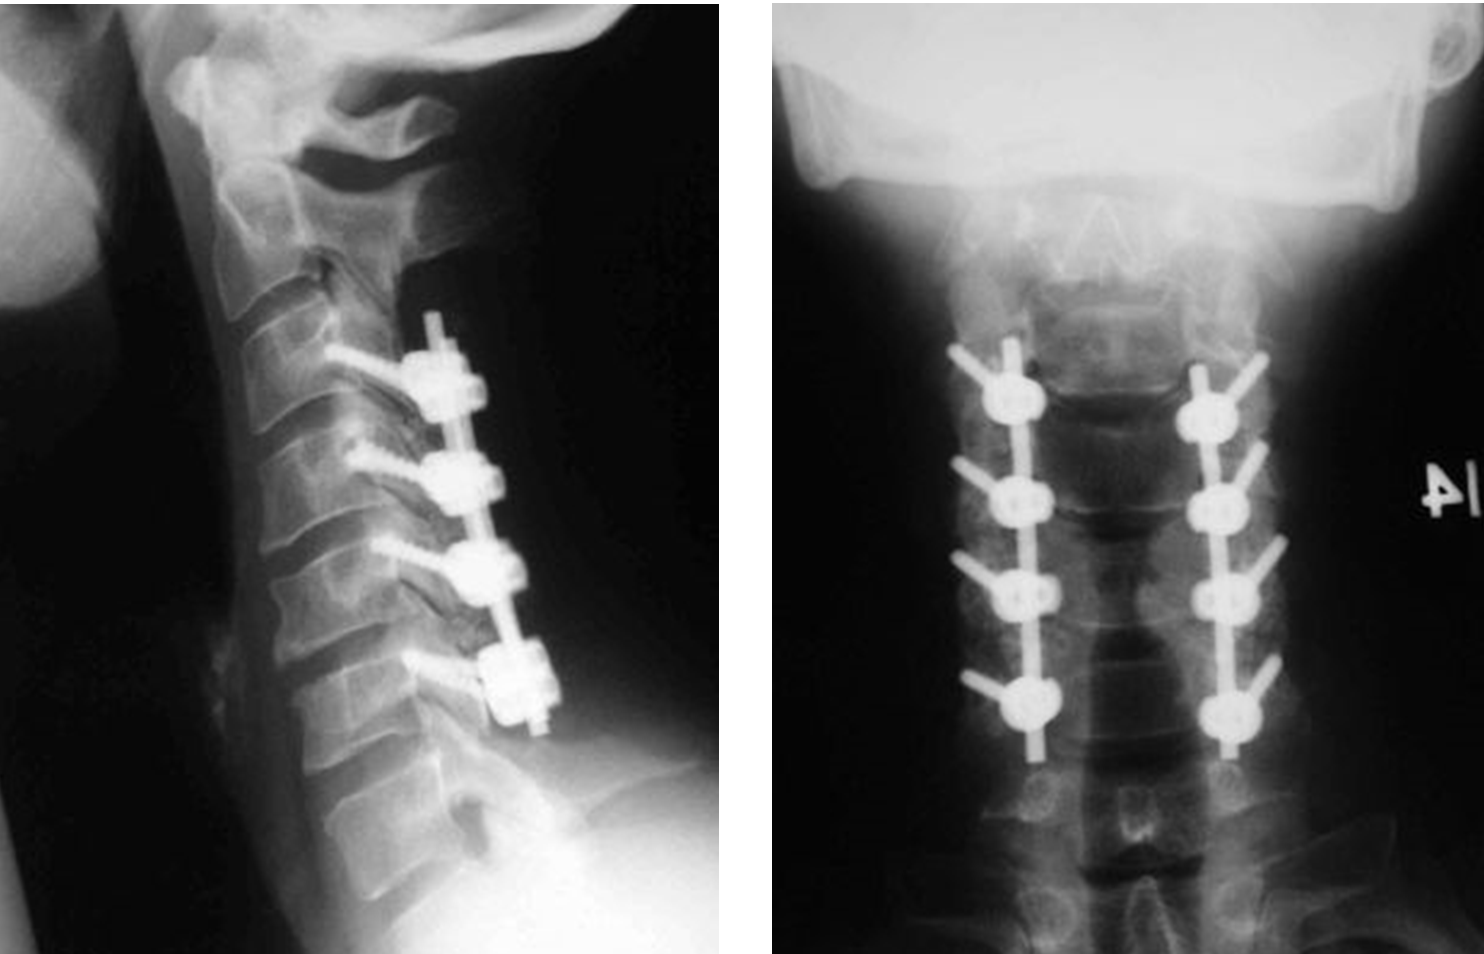 c1 c2 c3 cervical spine x ray